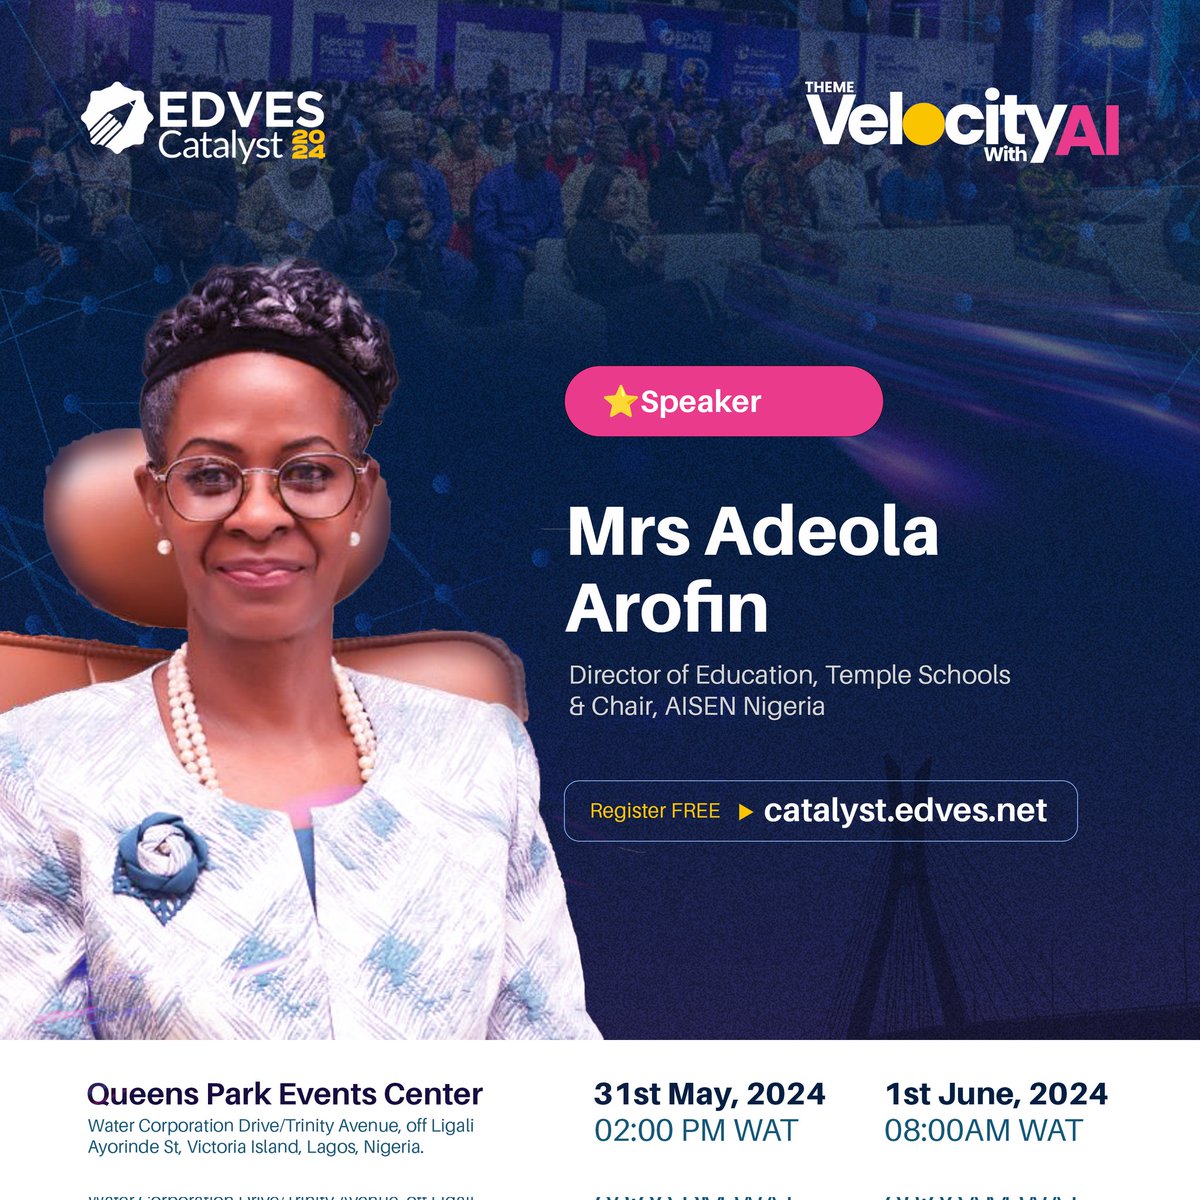 Adeola Arofin is an experienced educator with a passion for lifelong learning and teaching. With over 30 years of experience, she excels in teaching children of all abilities and training teachers, mentors, and parents.